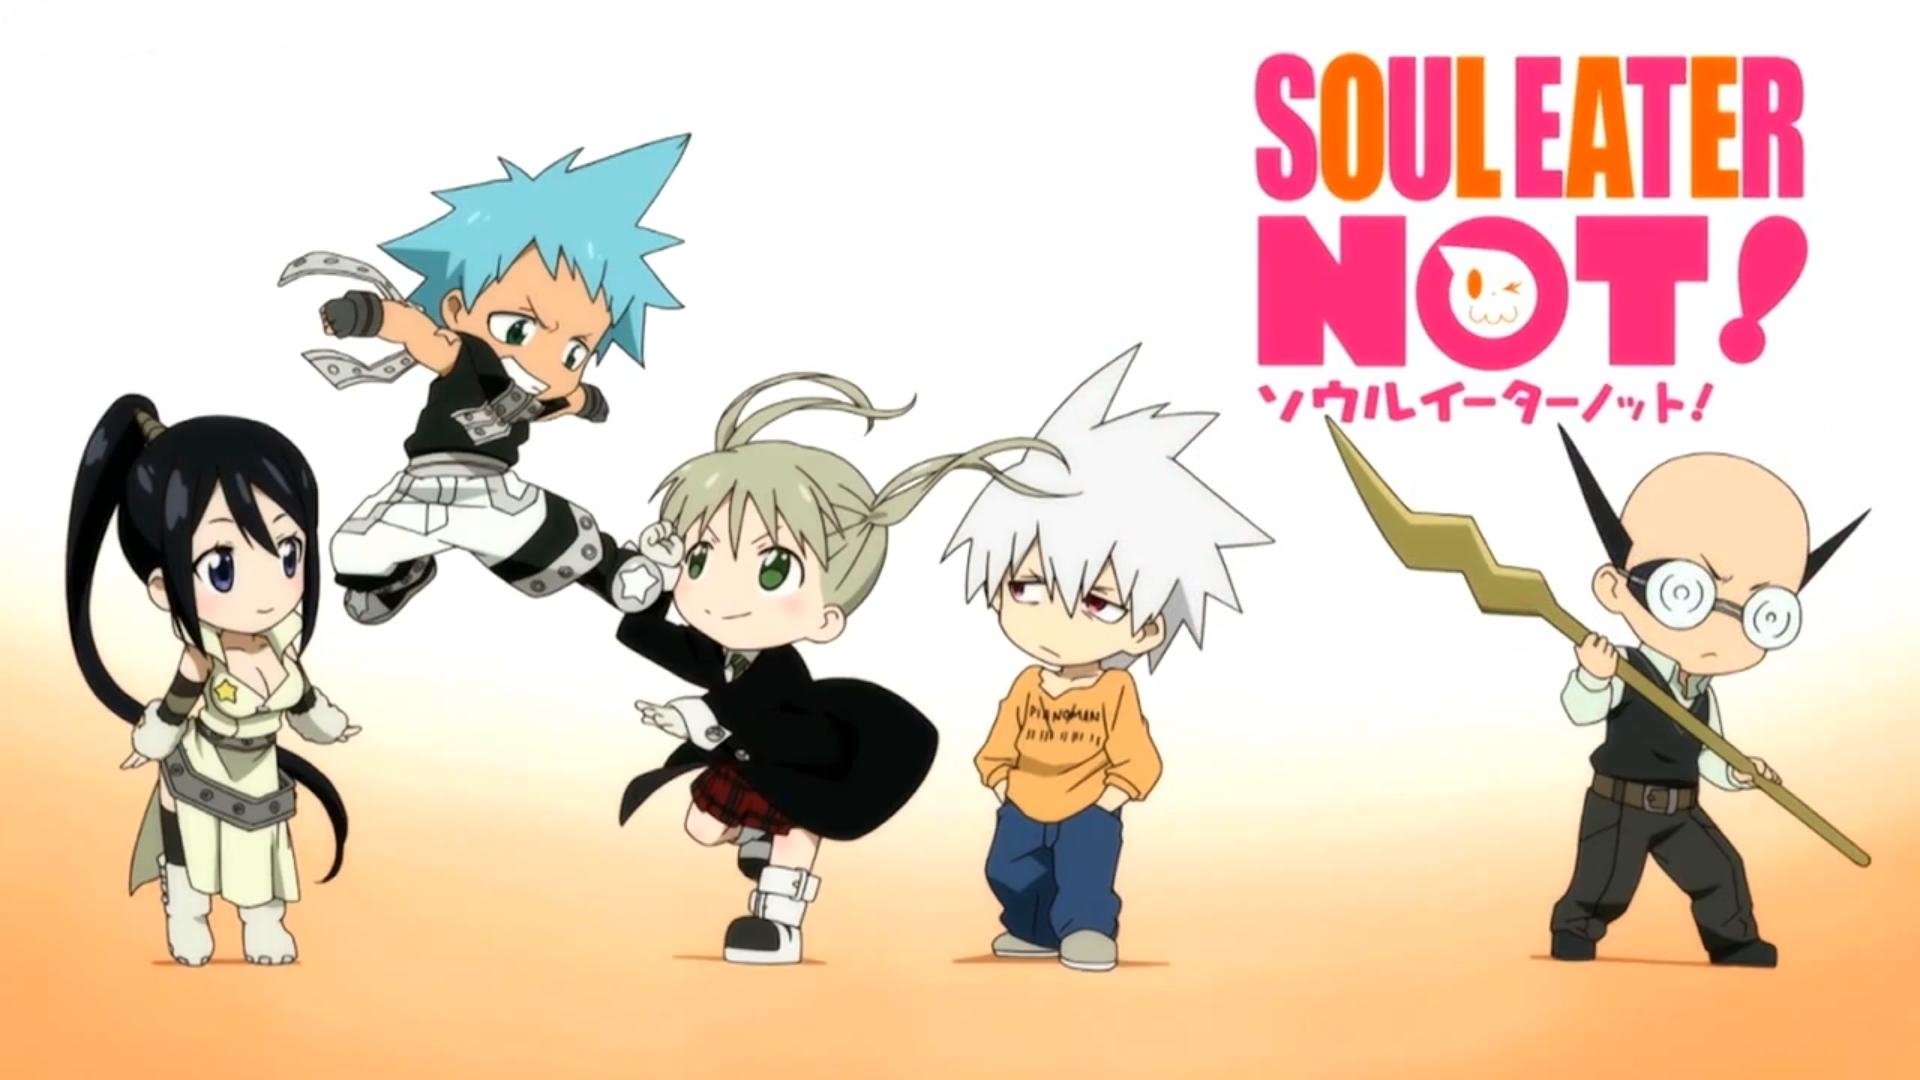 Wallpaper From Newest S E N Episode Soul Eater